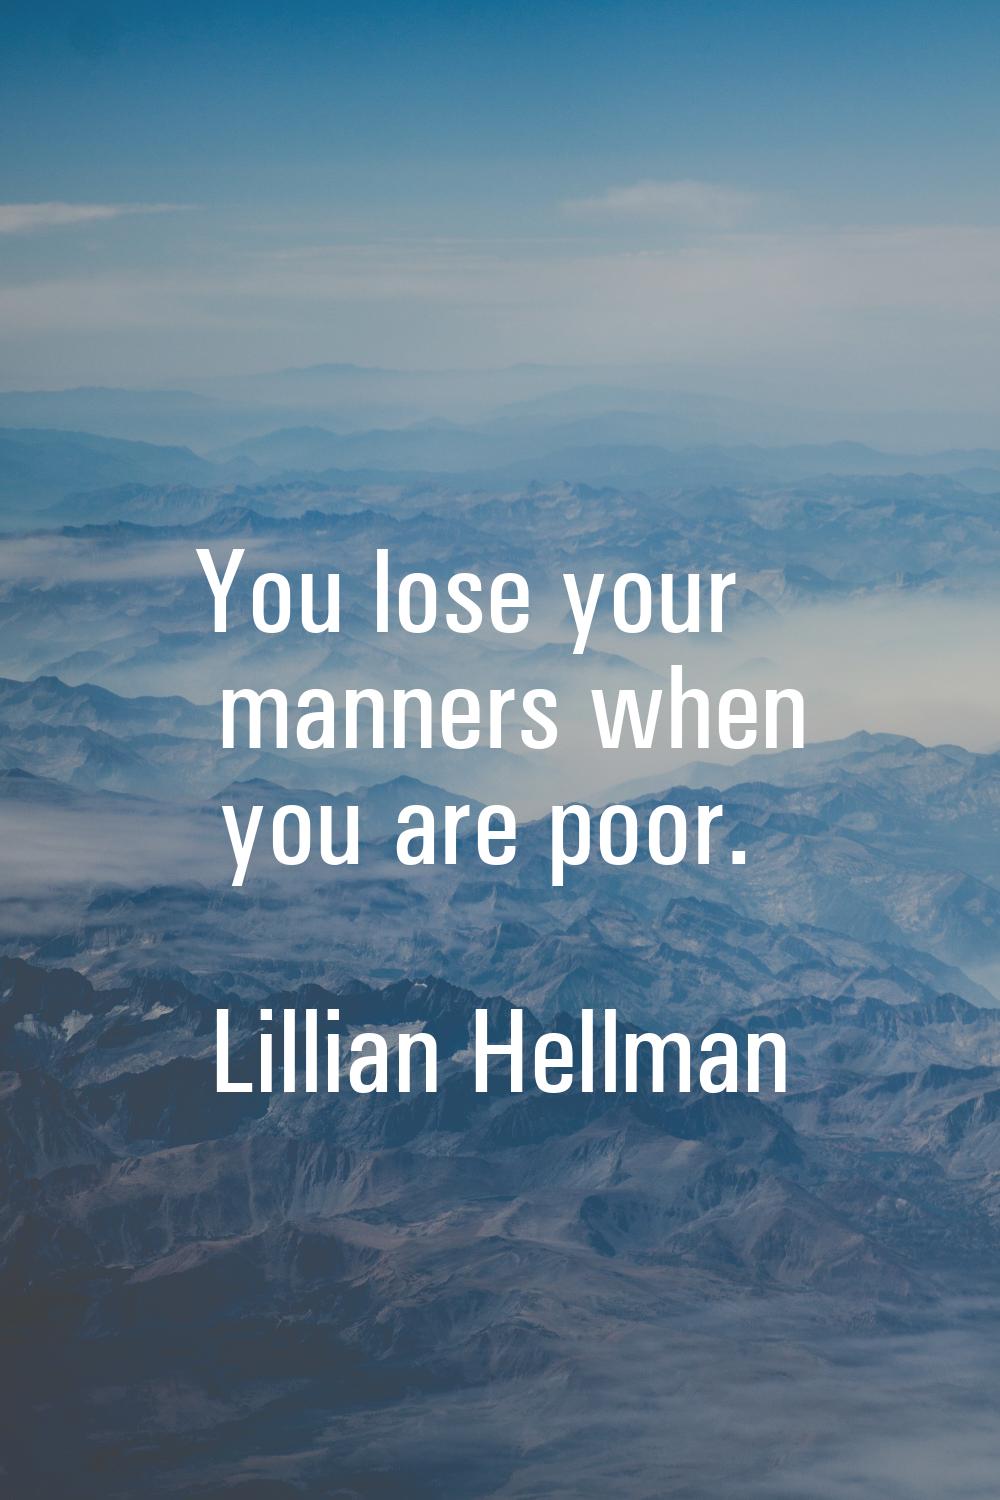 You lose your manners when you are poor.